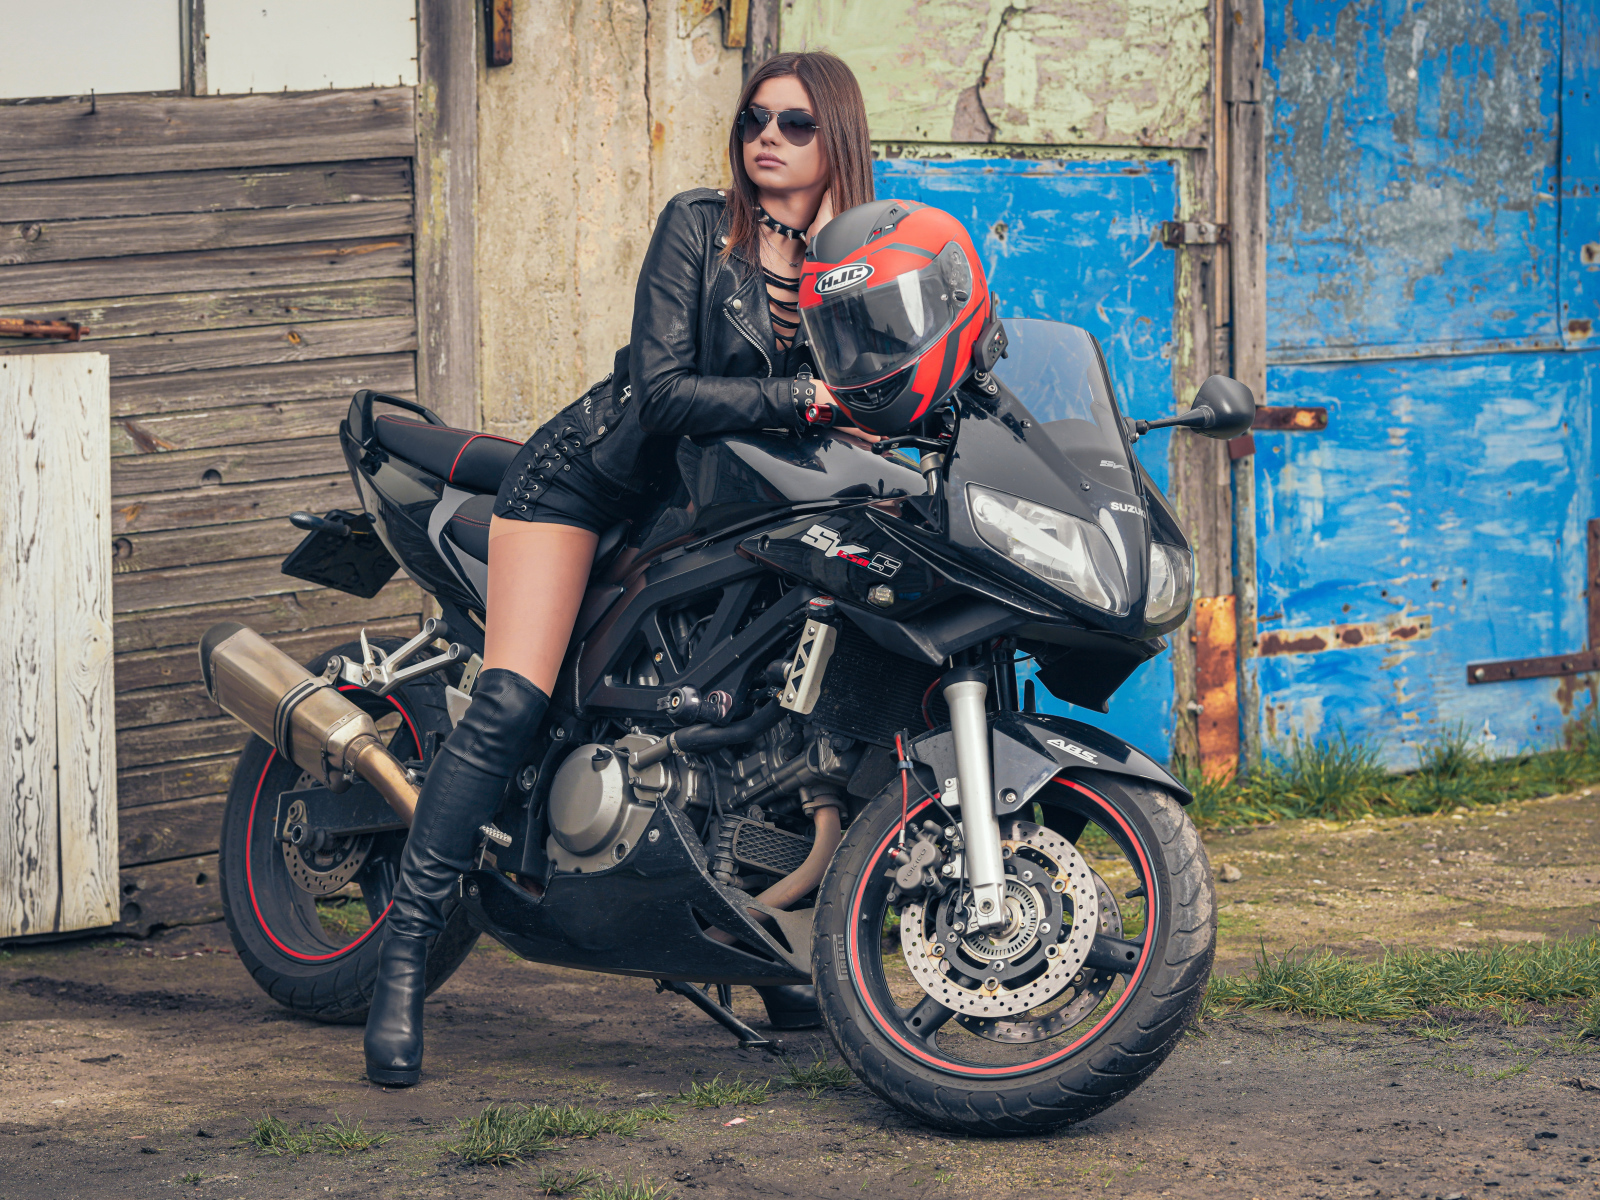 Young girl on a motorcycle Suzuki SV650S